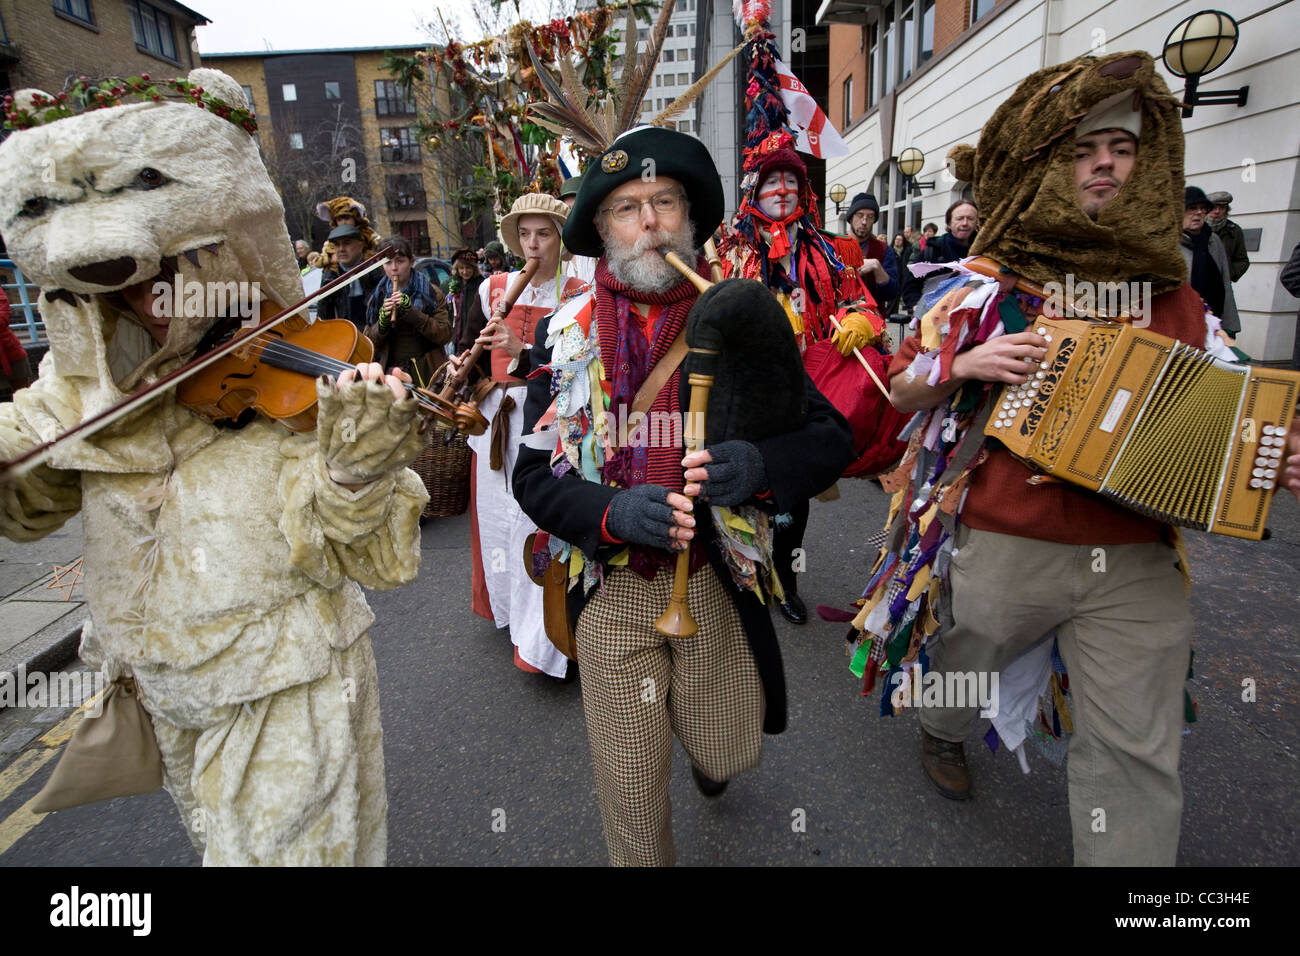 Performers and musicians accompany an annual traditional free theatre celebrating a 'wassail' to herald the new year Stock Photo